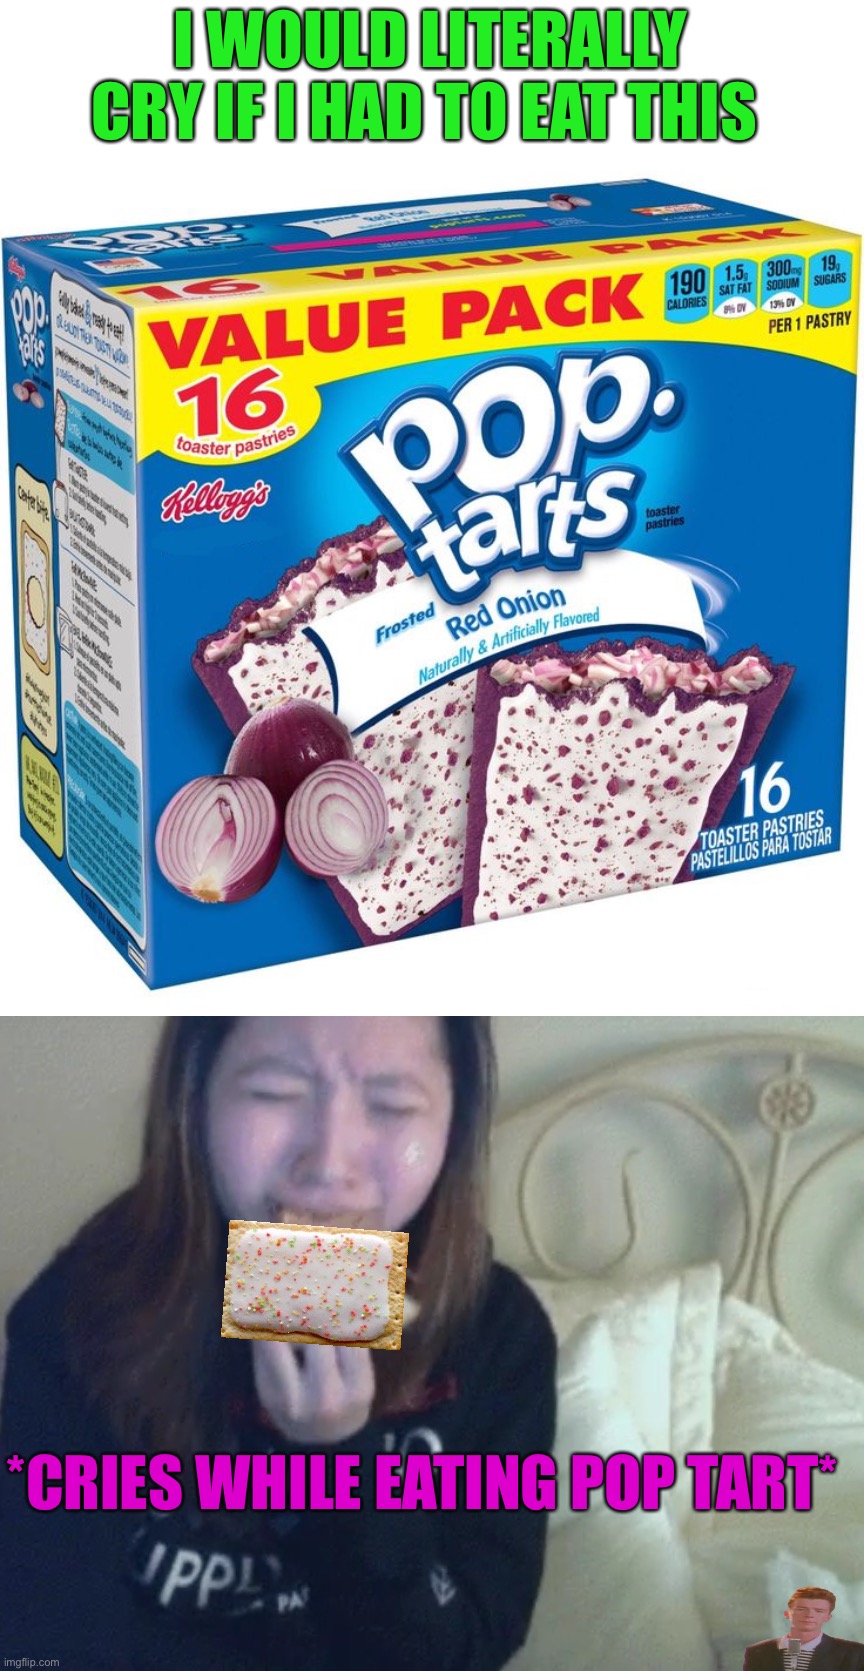 *pain intensifies* | I WOULD LITERALLY CRY IF I HAD TO EAT THIS; *CRIES WHILE EATING POP TART* | image tagged in memes,funny,pain,pop tarts,rickroll,ouch | made w/ Imgflip meme maker